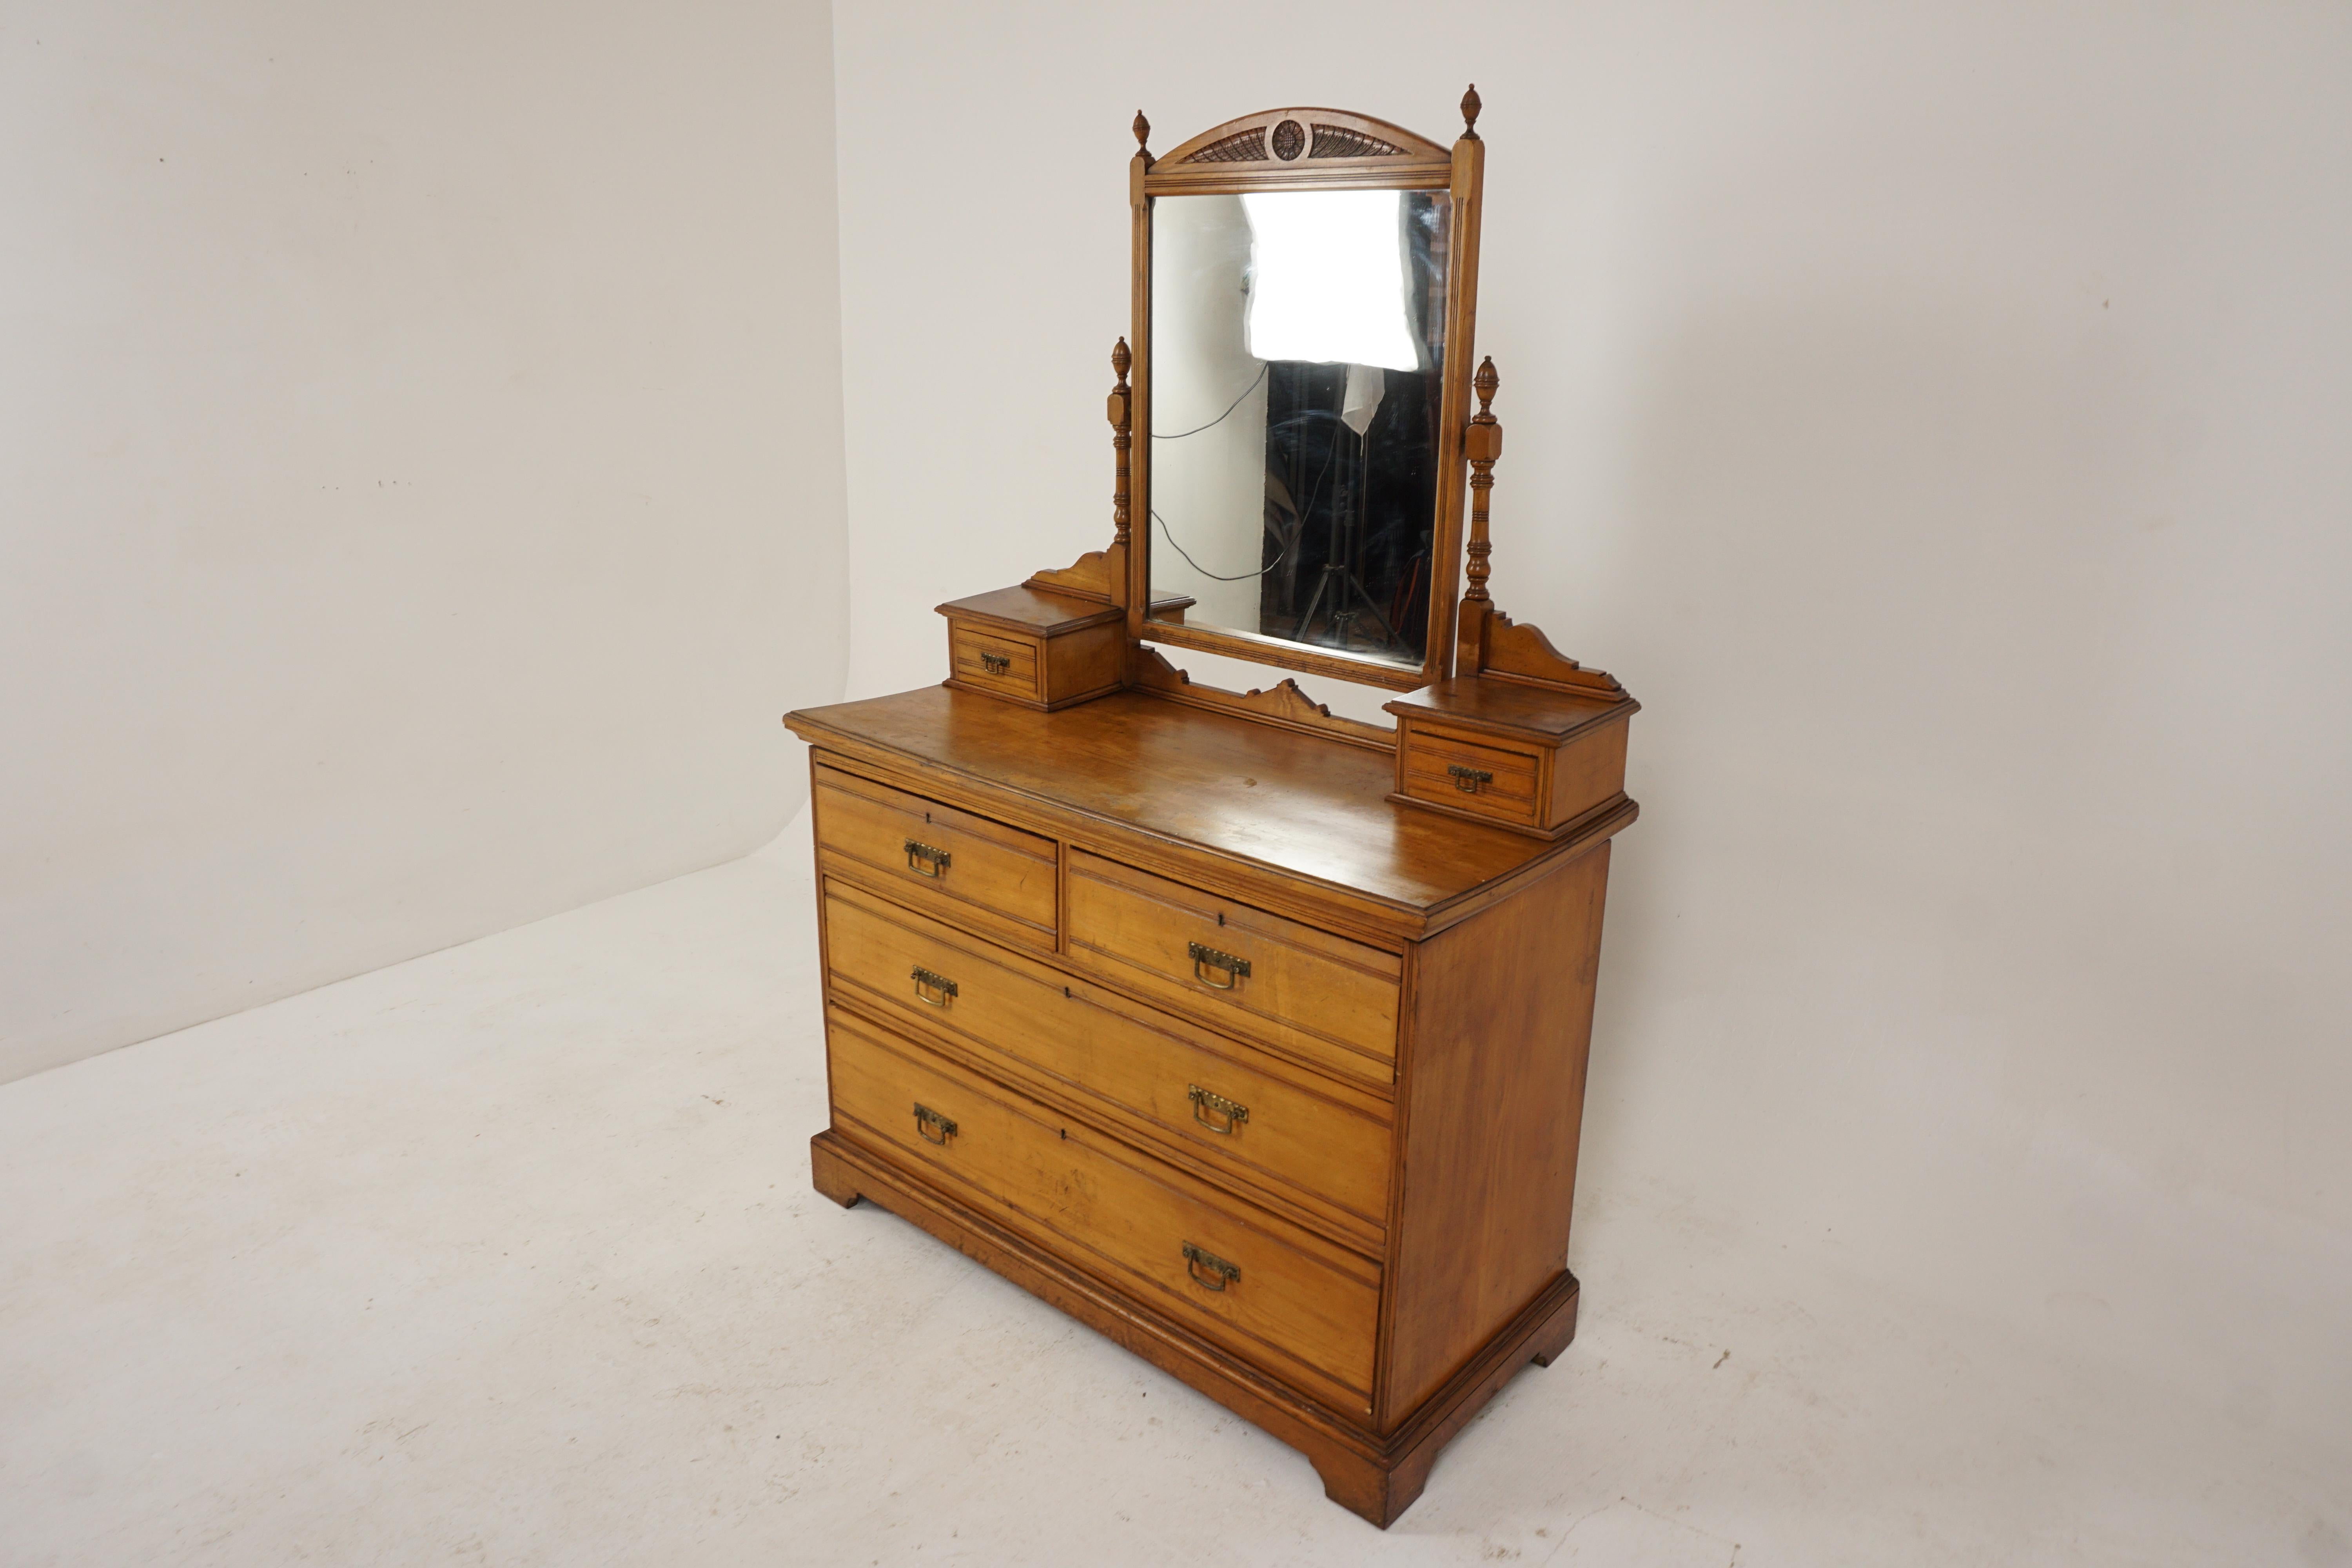 Antique Victorian vanity, large ash chest of drawers, Scotland 1880, H220

Scotland 1880
Solid ash
Original finish.
Framed mirror above.
Pair of jewelry drawers above base.
Two short and two long drawers underneath with original hardware.
All